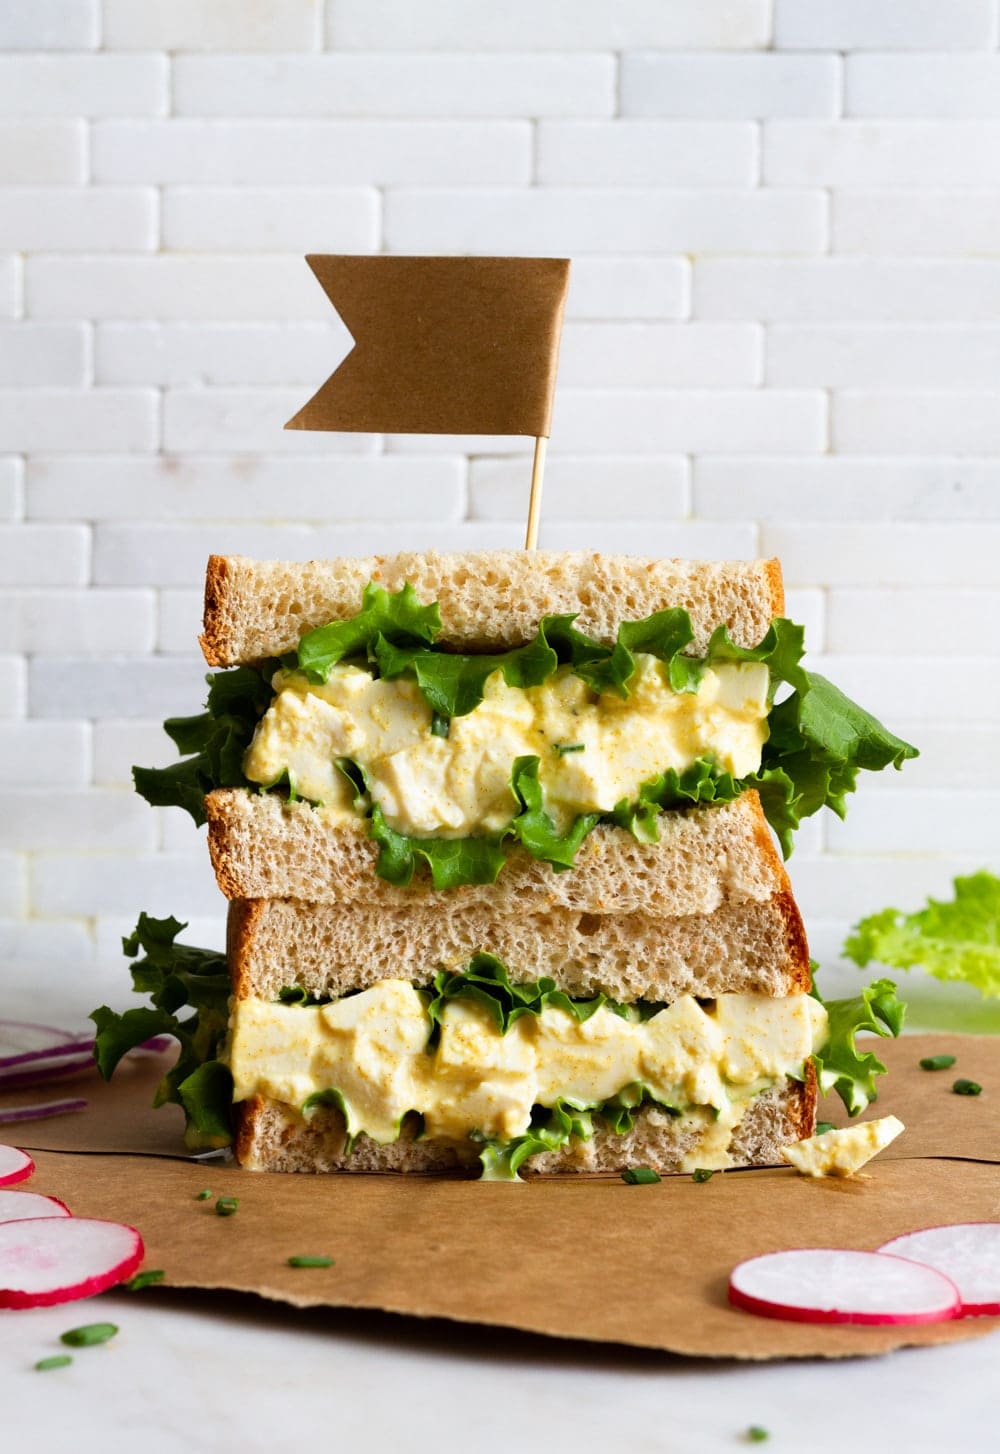 vegan egg salad sandwich with leafy greens sliced in half and stacked.